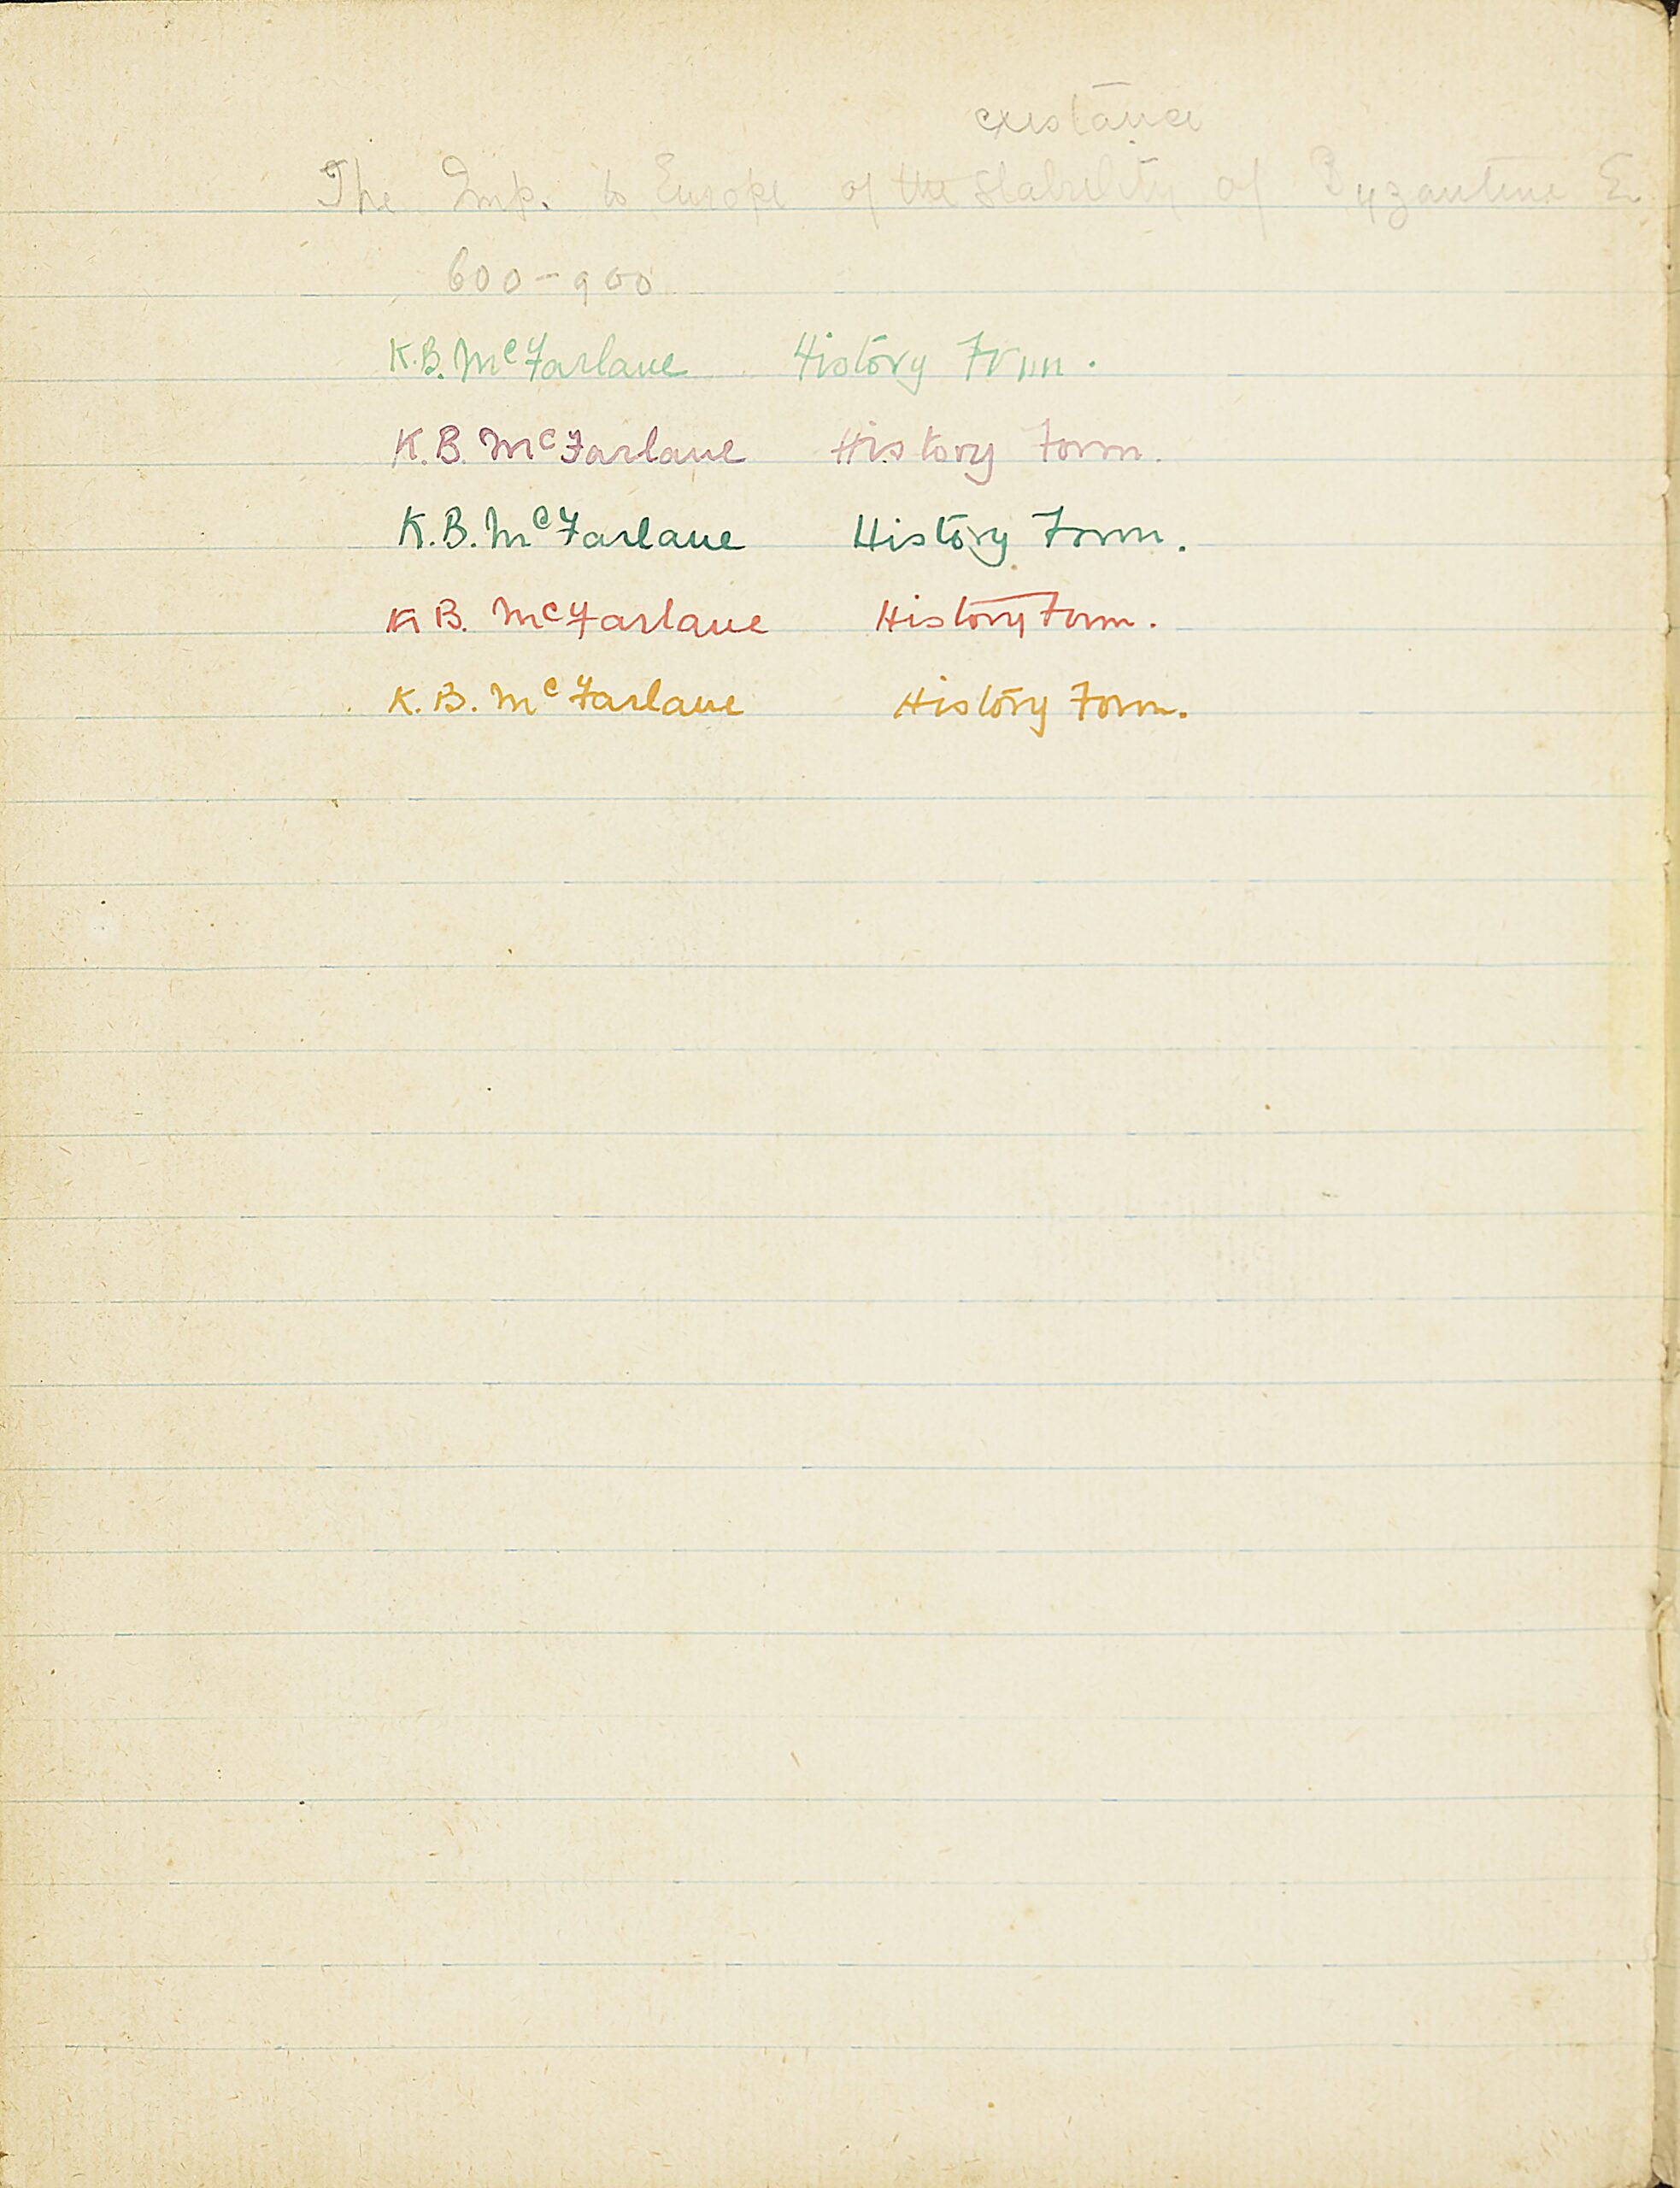 Back page of a notebook, in which McFarlane has written his name and the words 'History Form' 5 times, in different coloured ink (light blue, purple, green, red, and orange).